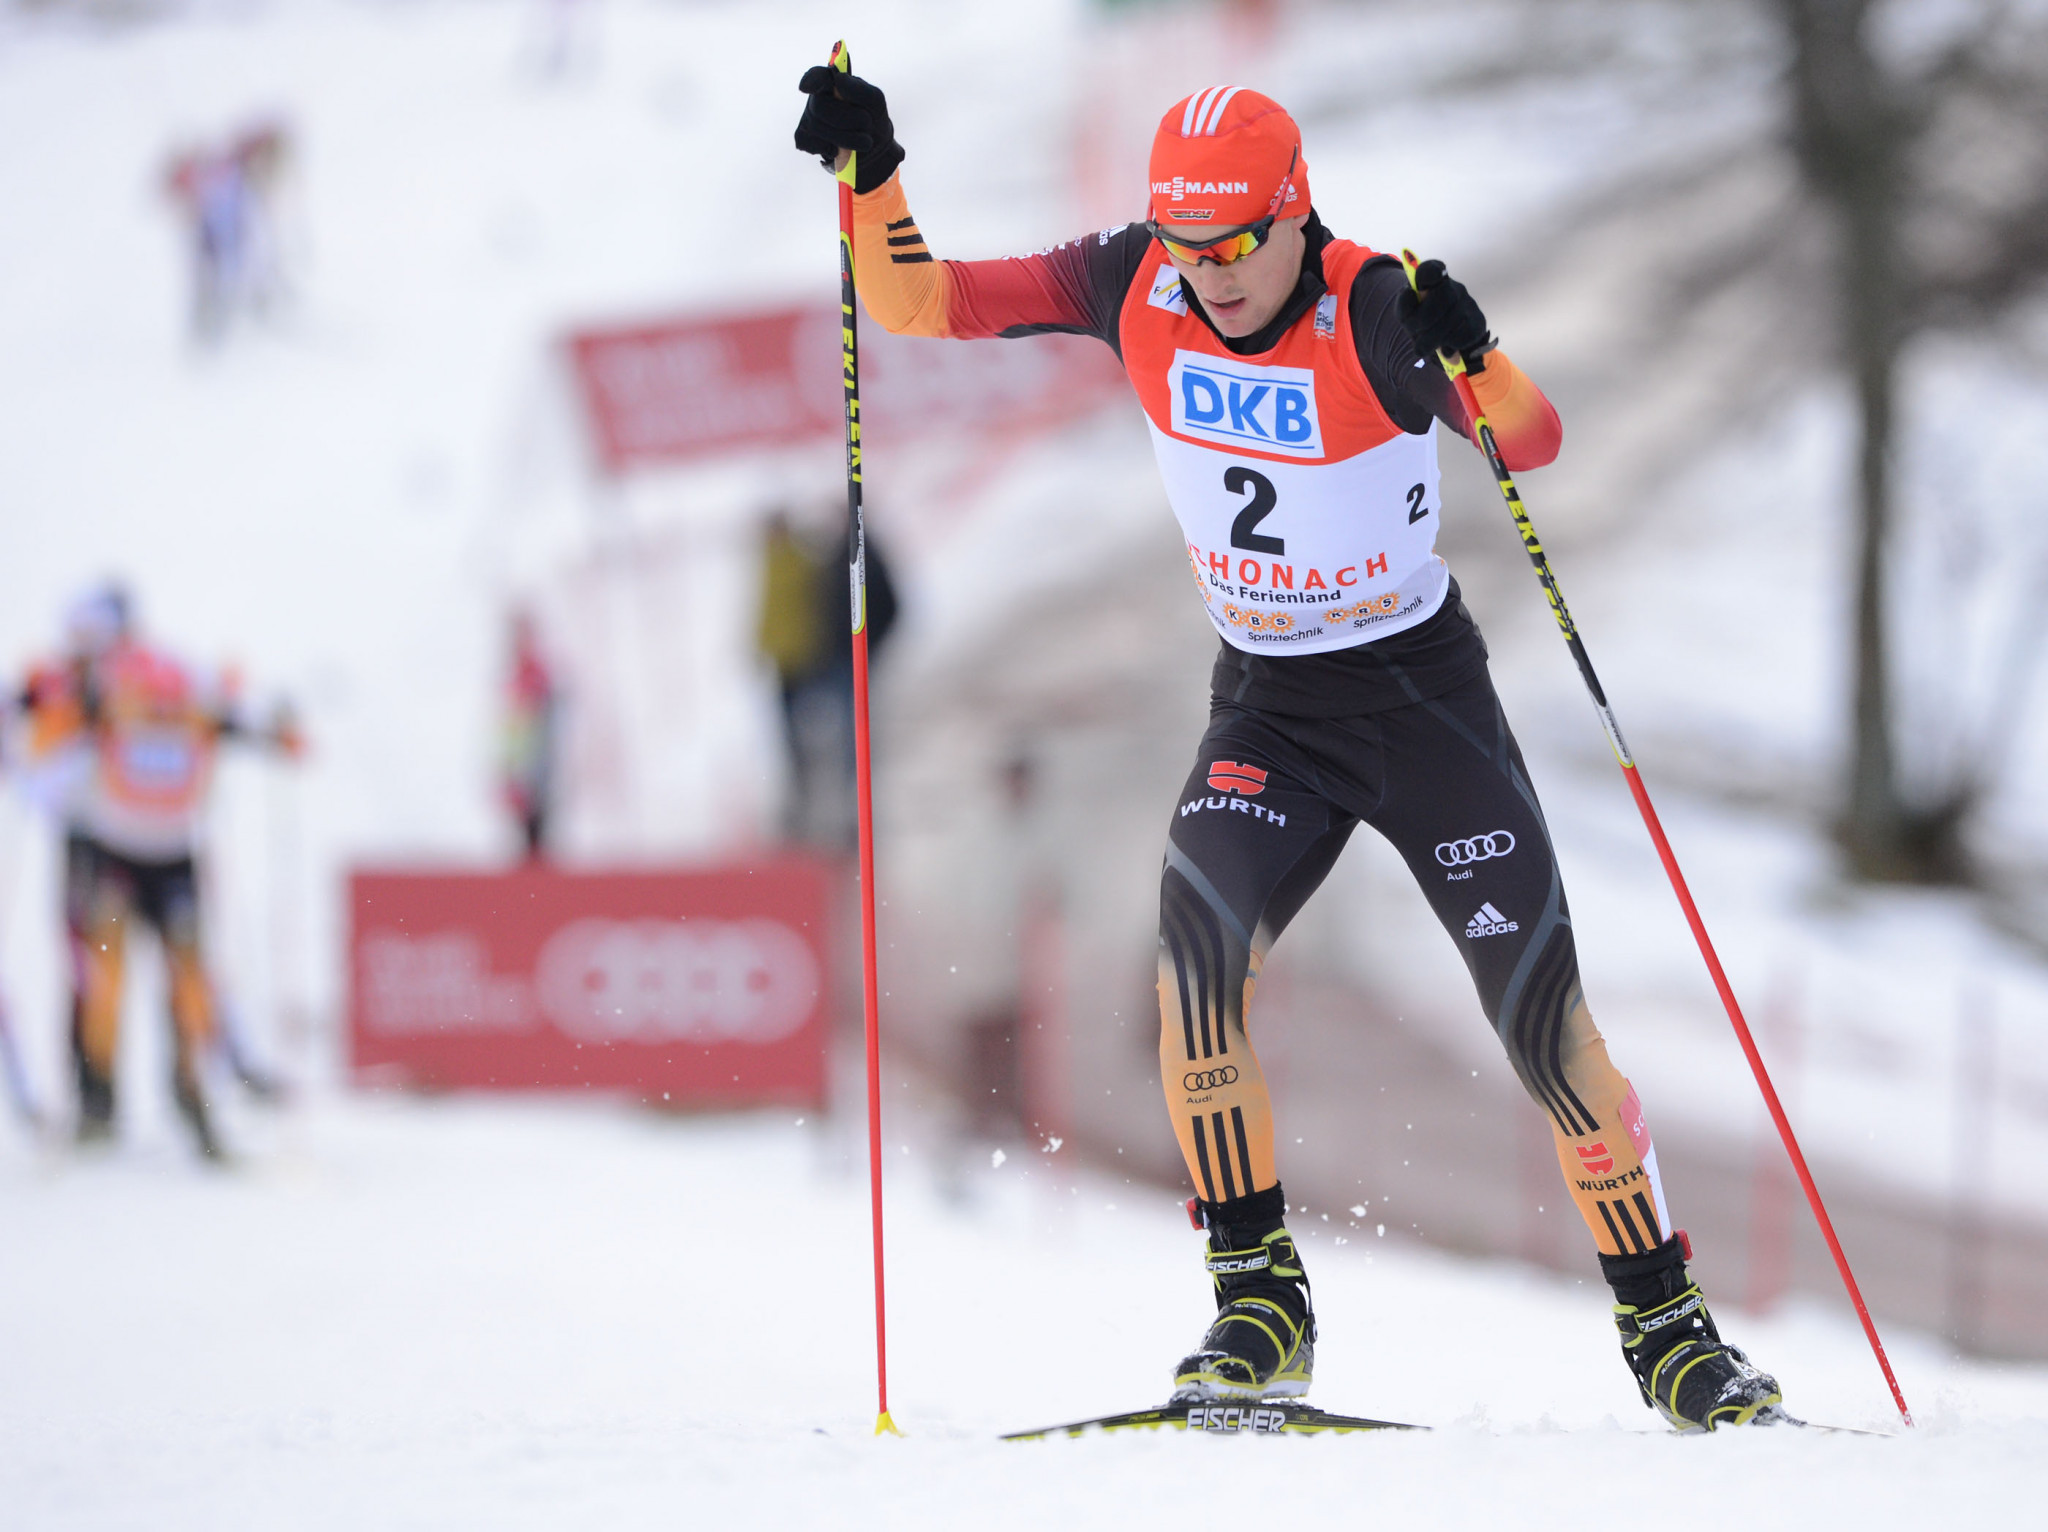 Haug announces Nordic Combined retirement after ski jumping crashes